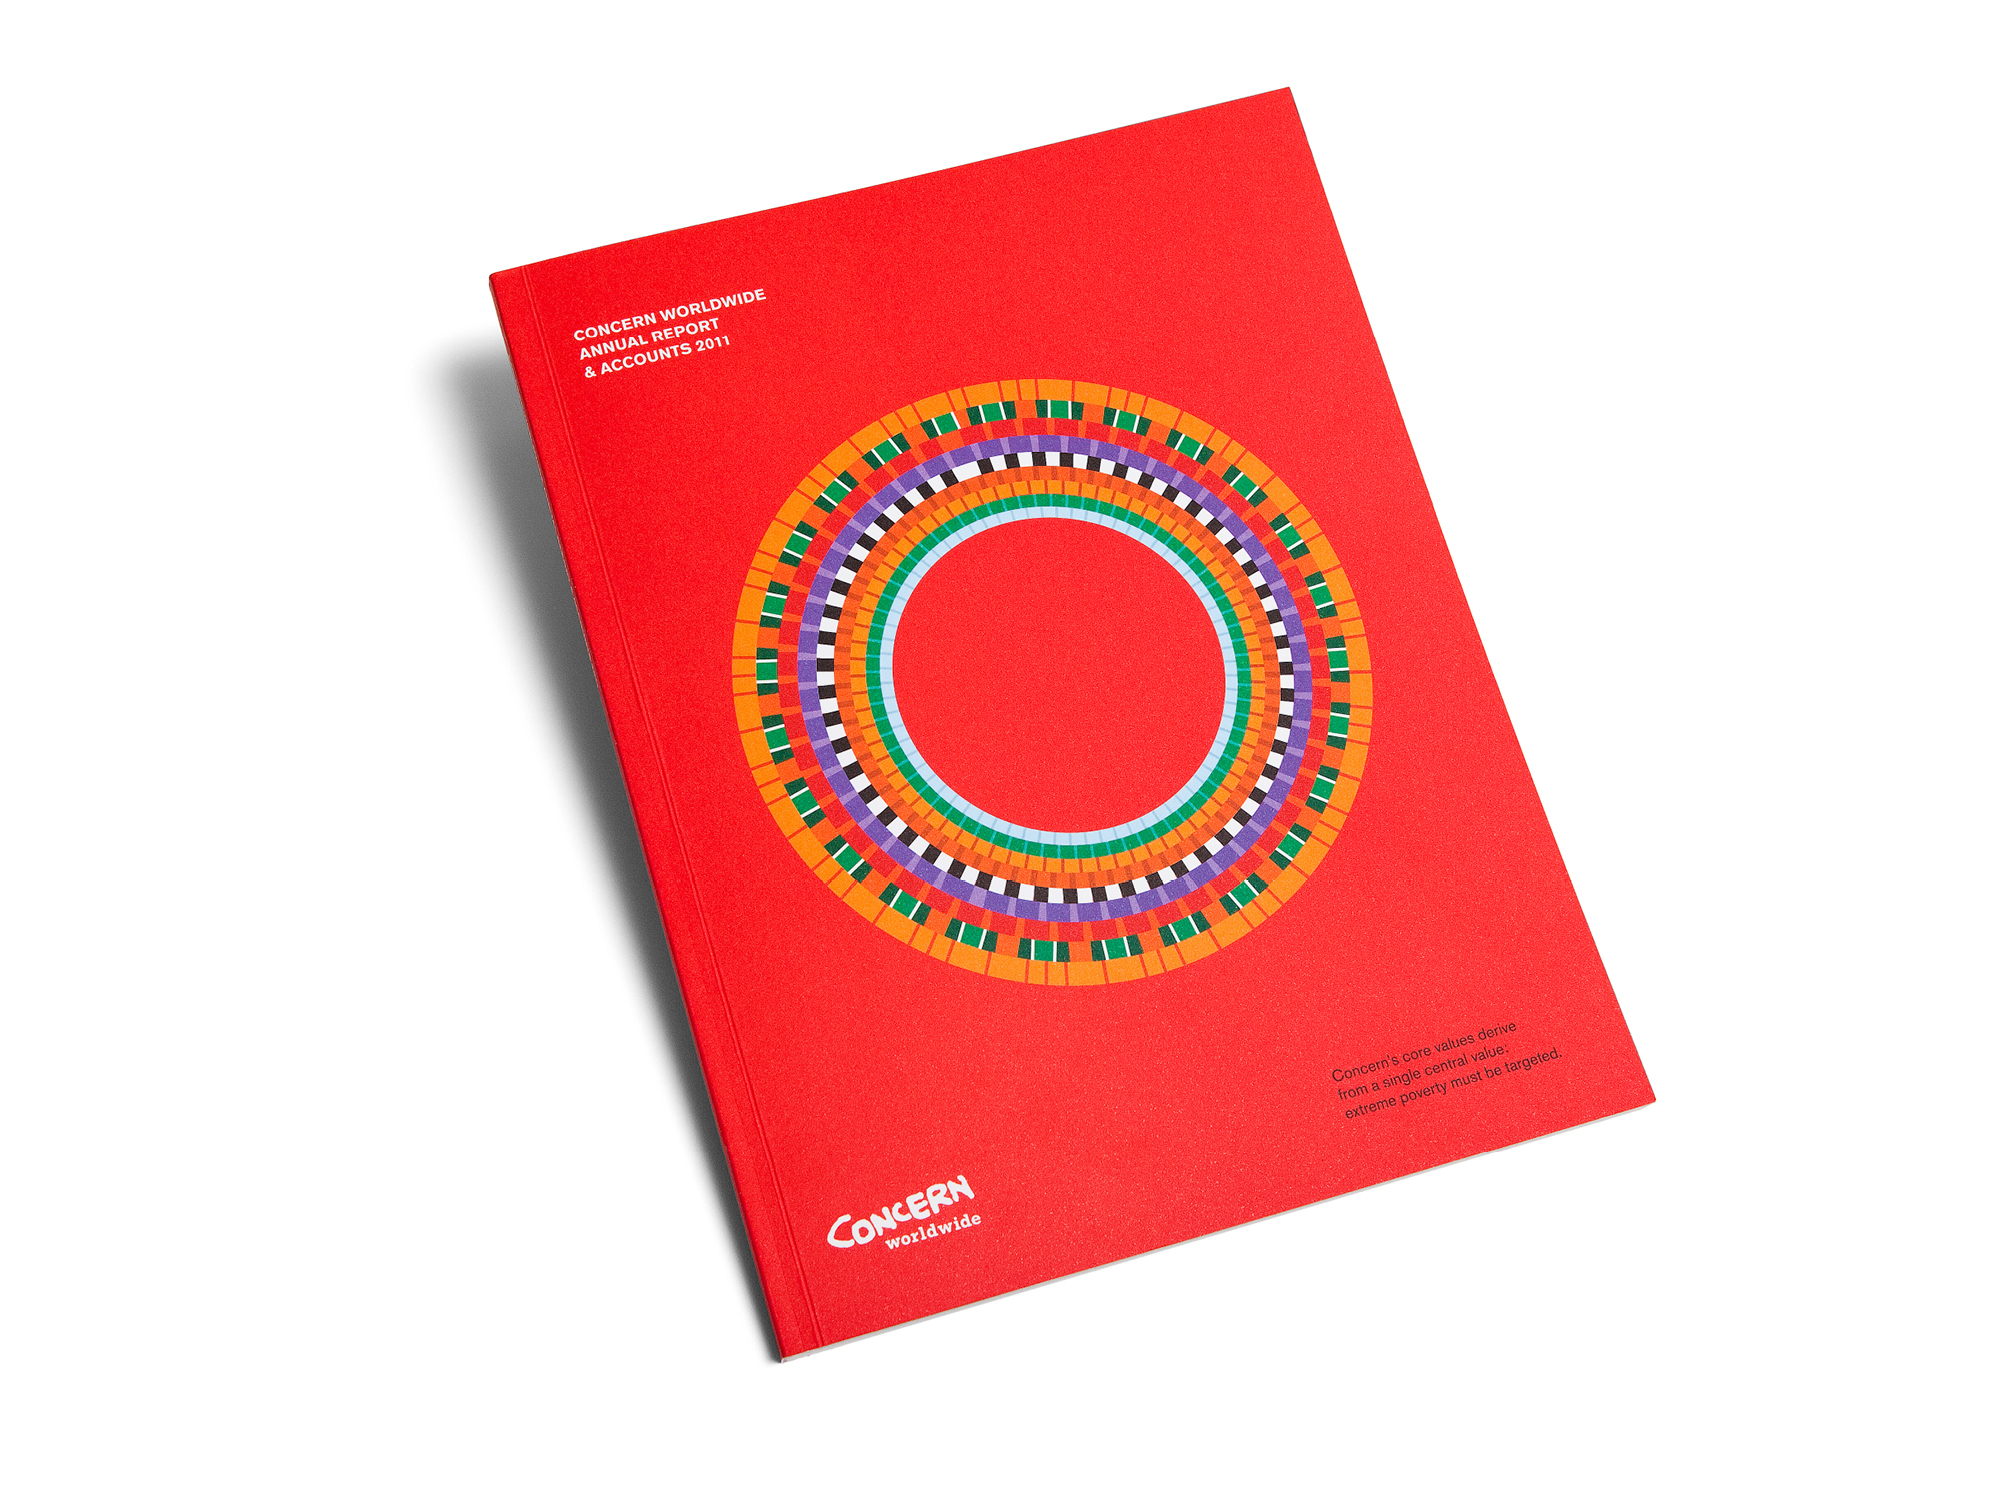 Cover image: Concern Worldwide Annual Report (2012)